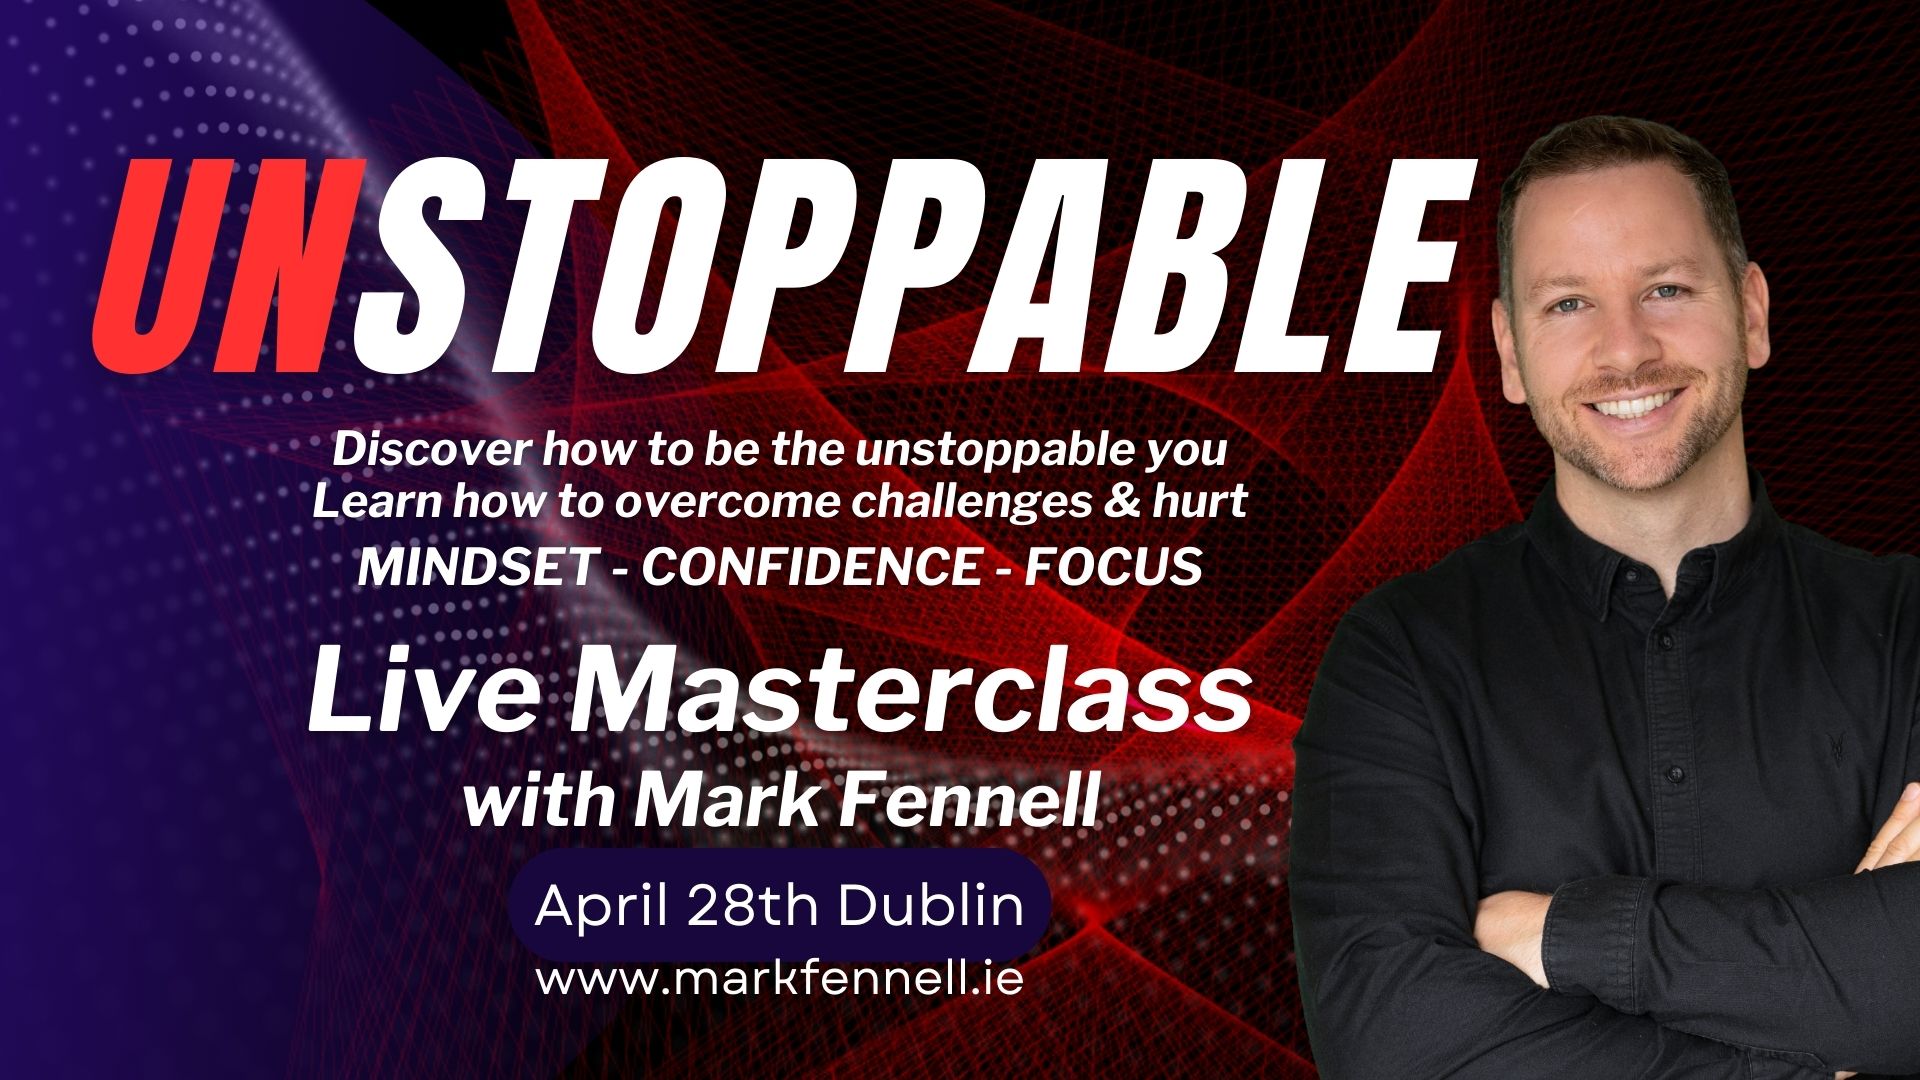 Unstoppable Live Masterclass with Mark Fennell